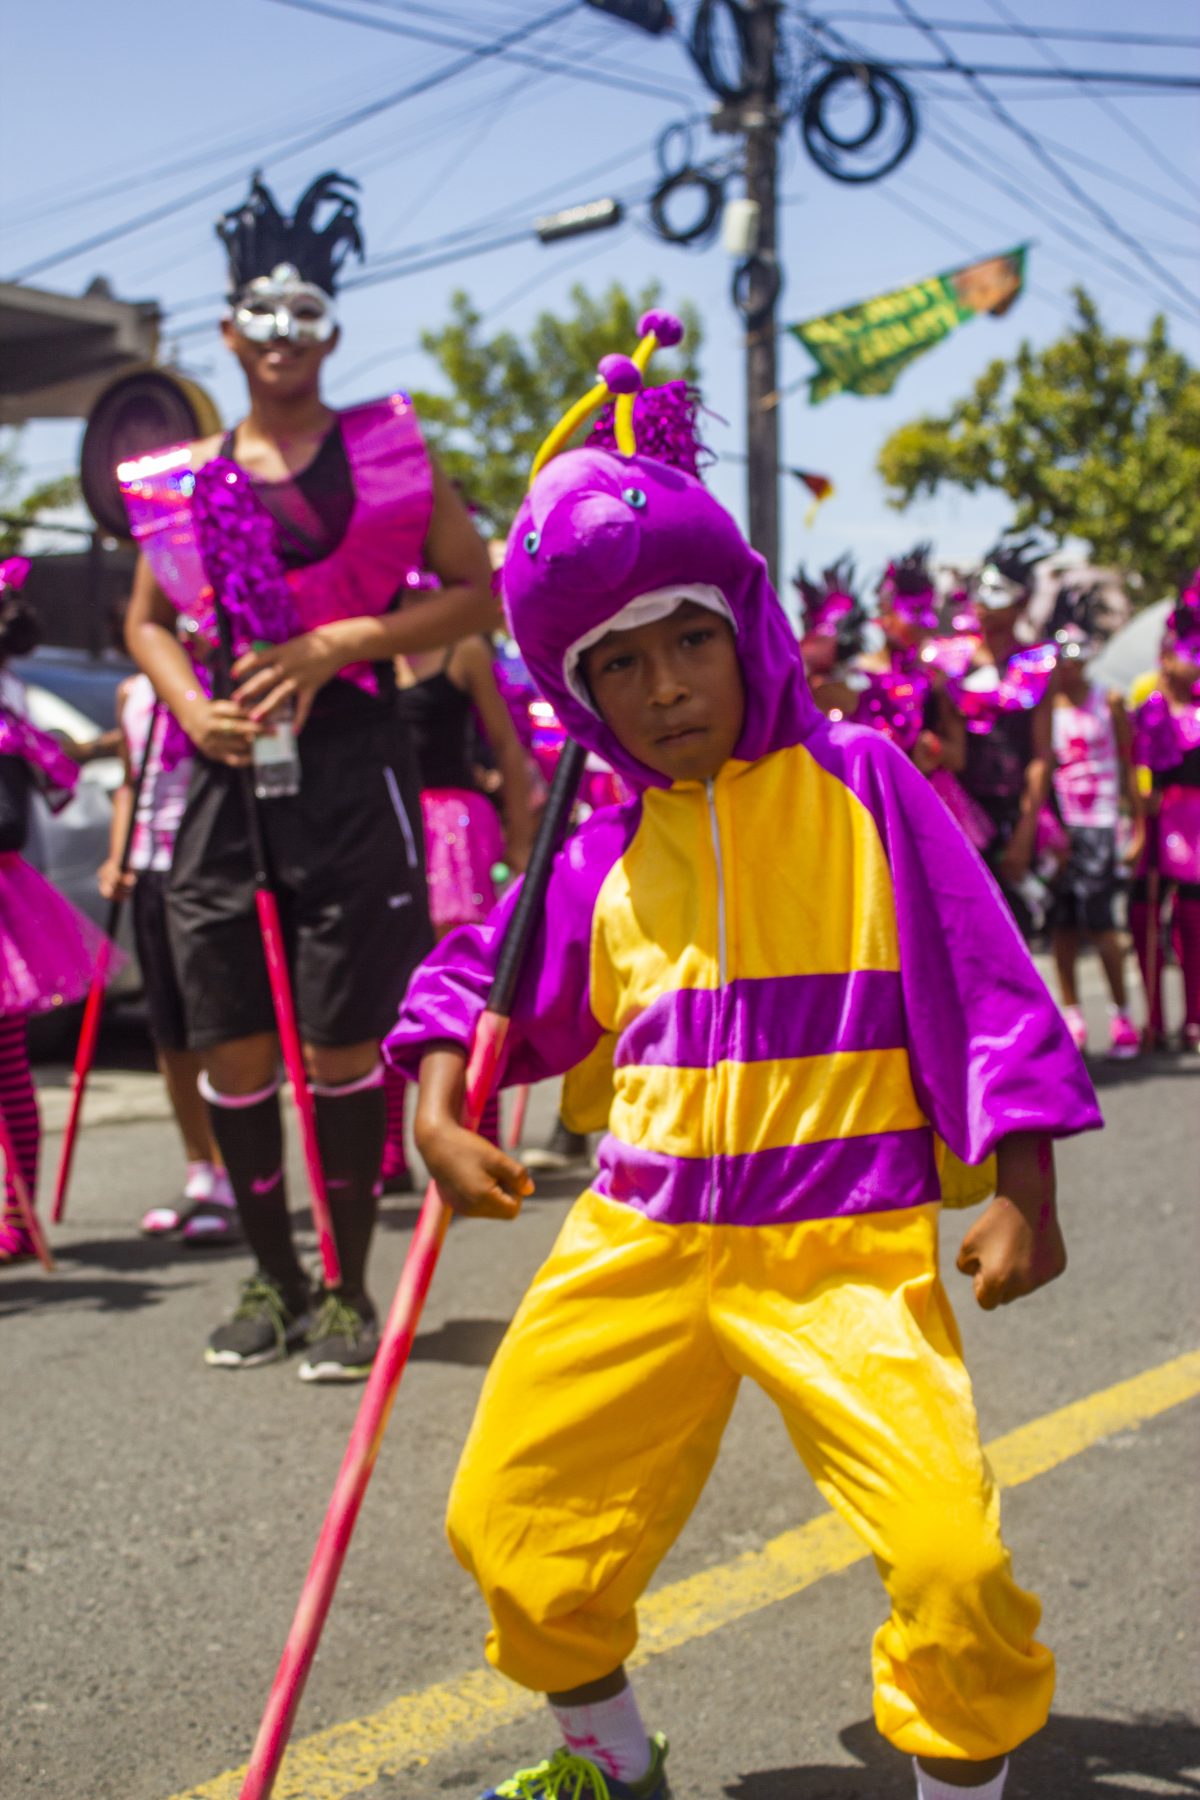 A young reveller ‘Mashin’ down’ the road yesterday during the Children’s Mashramani Costume and Float Parade, which was held in Georgetown. See story and photos inside. (Photo by Rae Wiltshire)